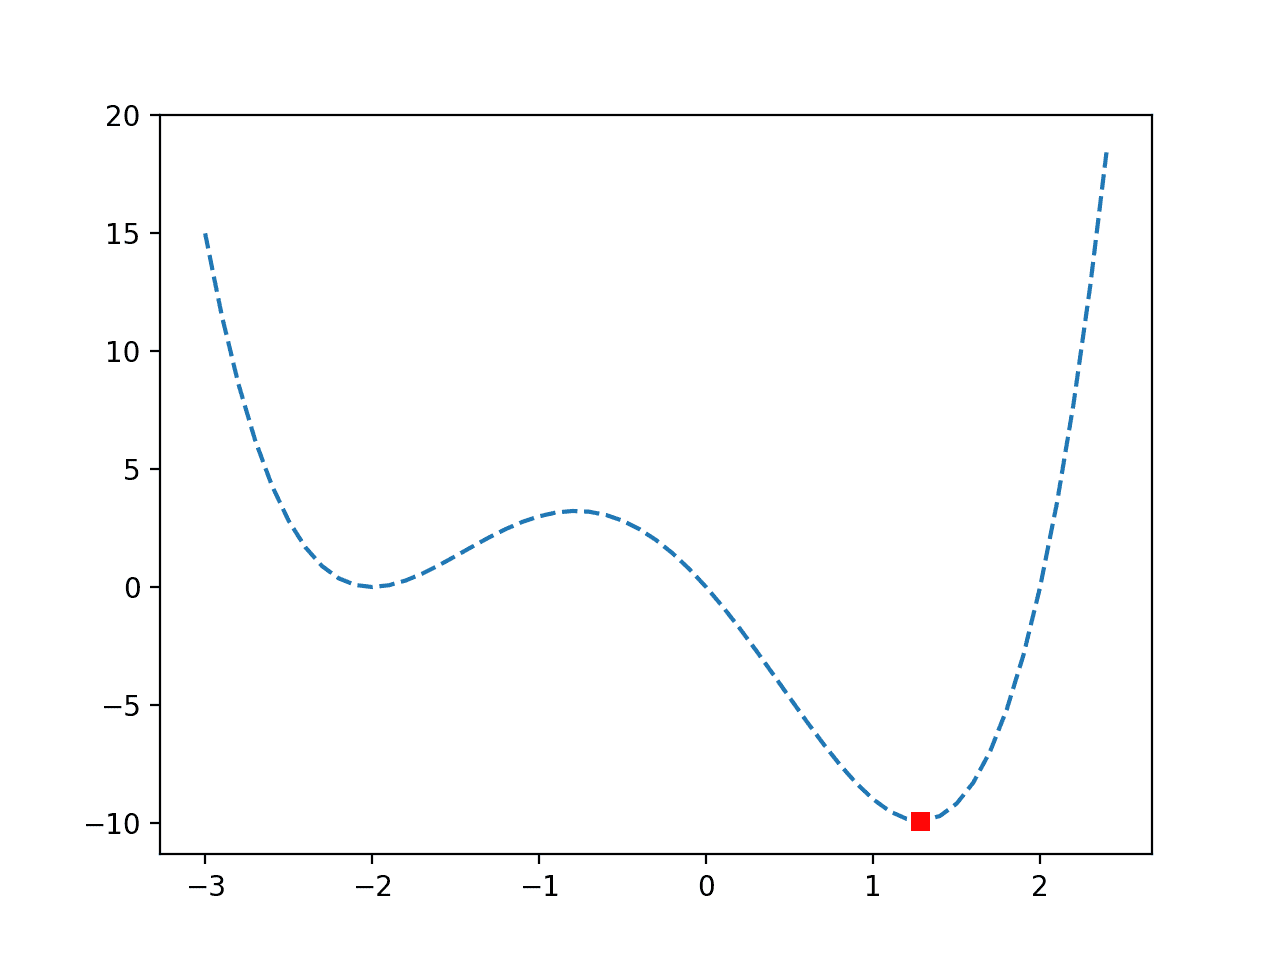 Line Plot of a Non-Convex Objective Function with Optima Marked